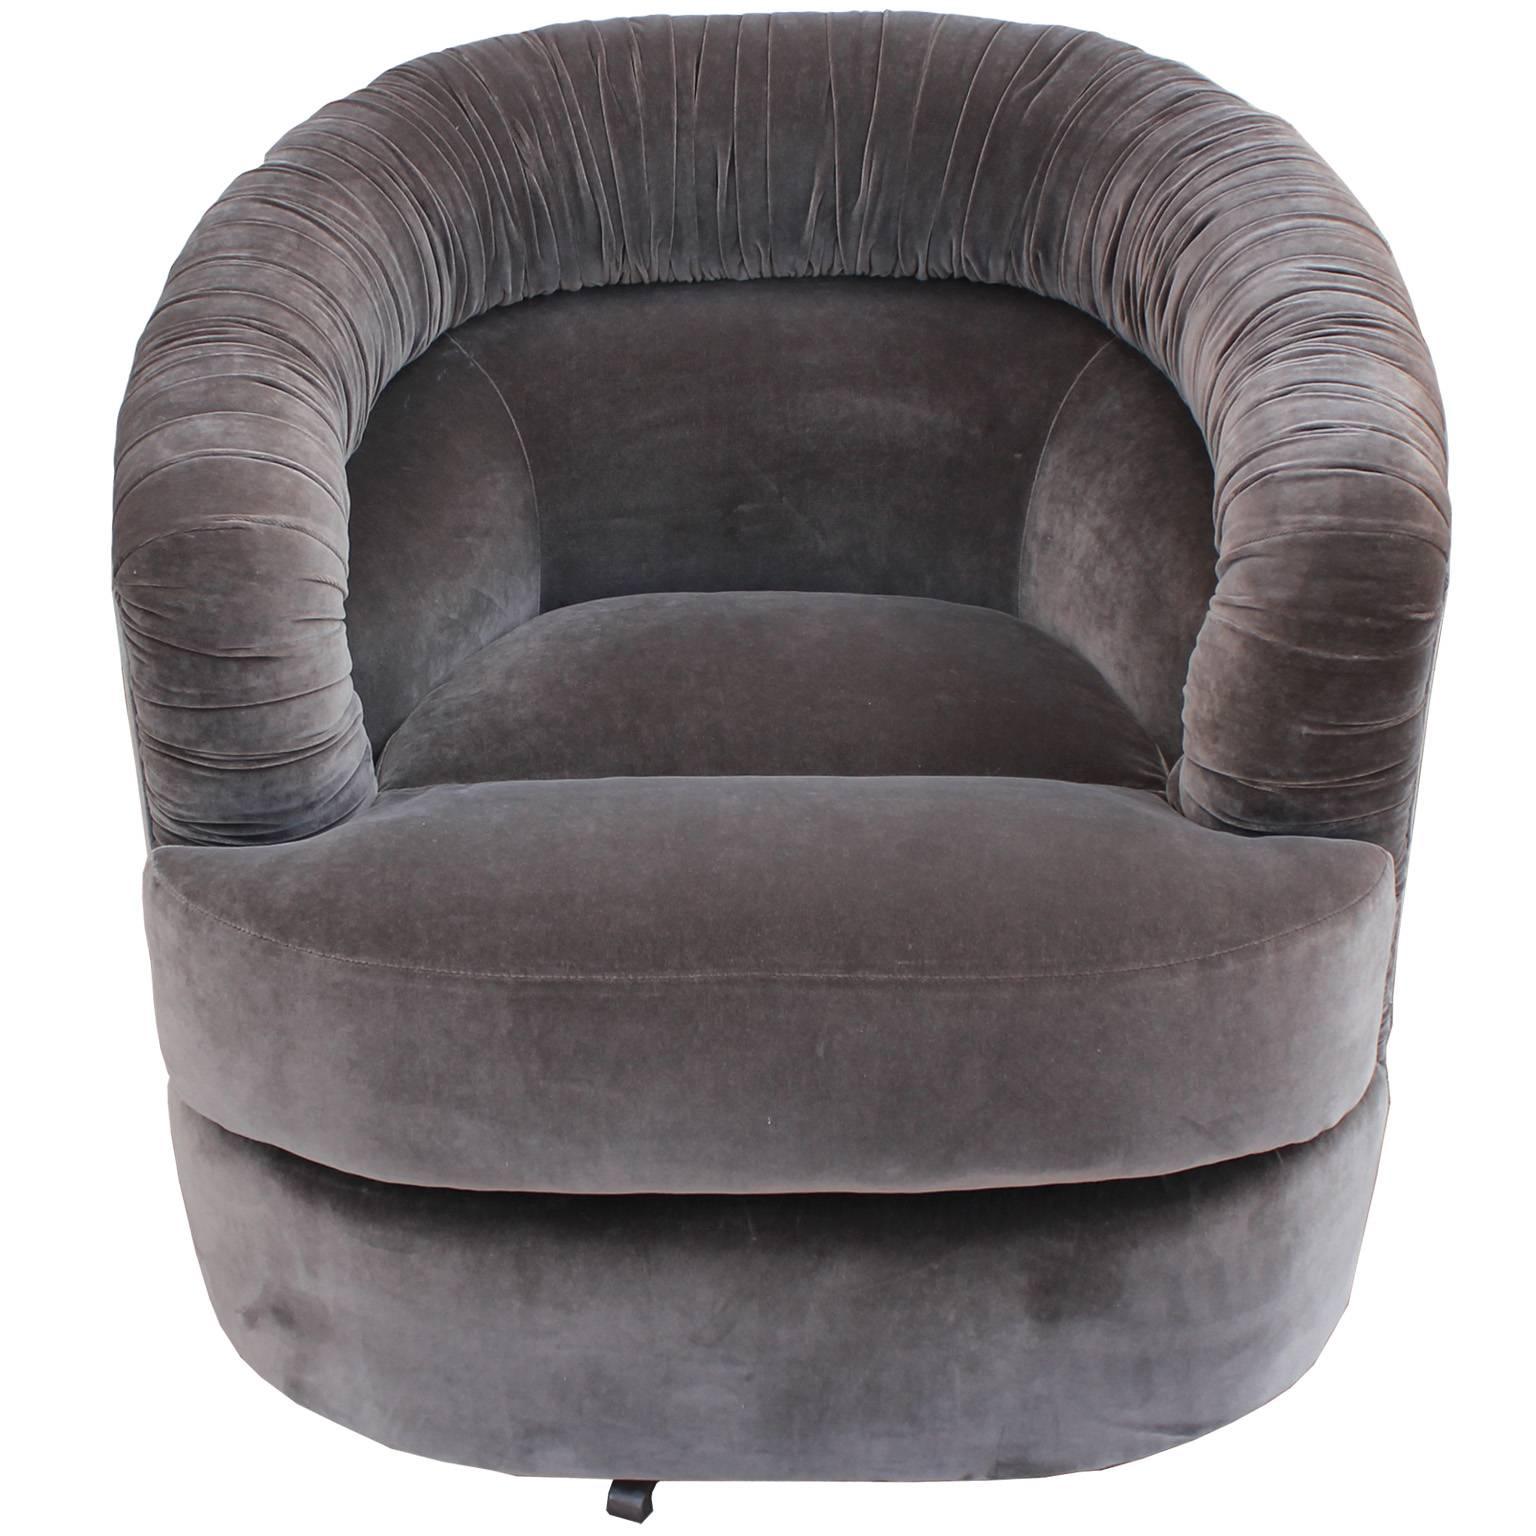 Stunning pair of ultra luxe and comfortable swivel chairs. Chairs are freshly upholstered in a warm grey velvet. A ruched or pleated back adds visual interest to the clean lined piece.